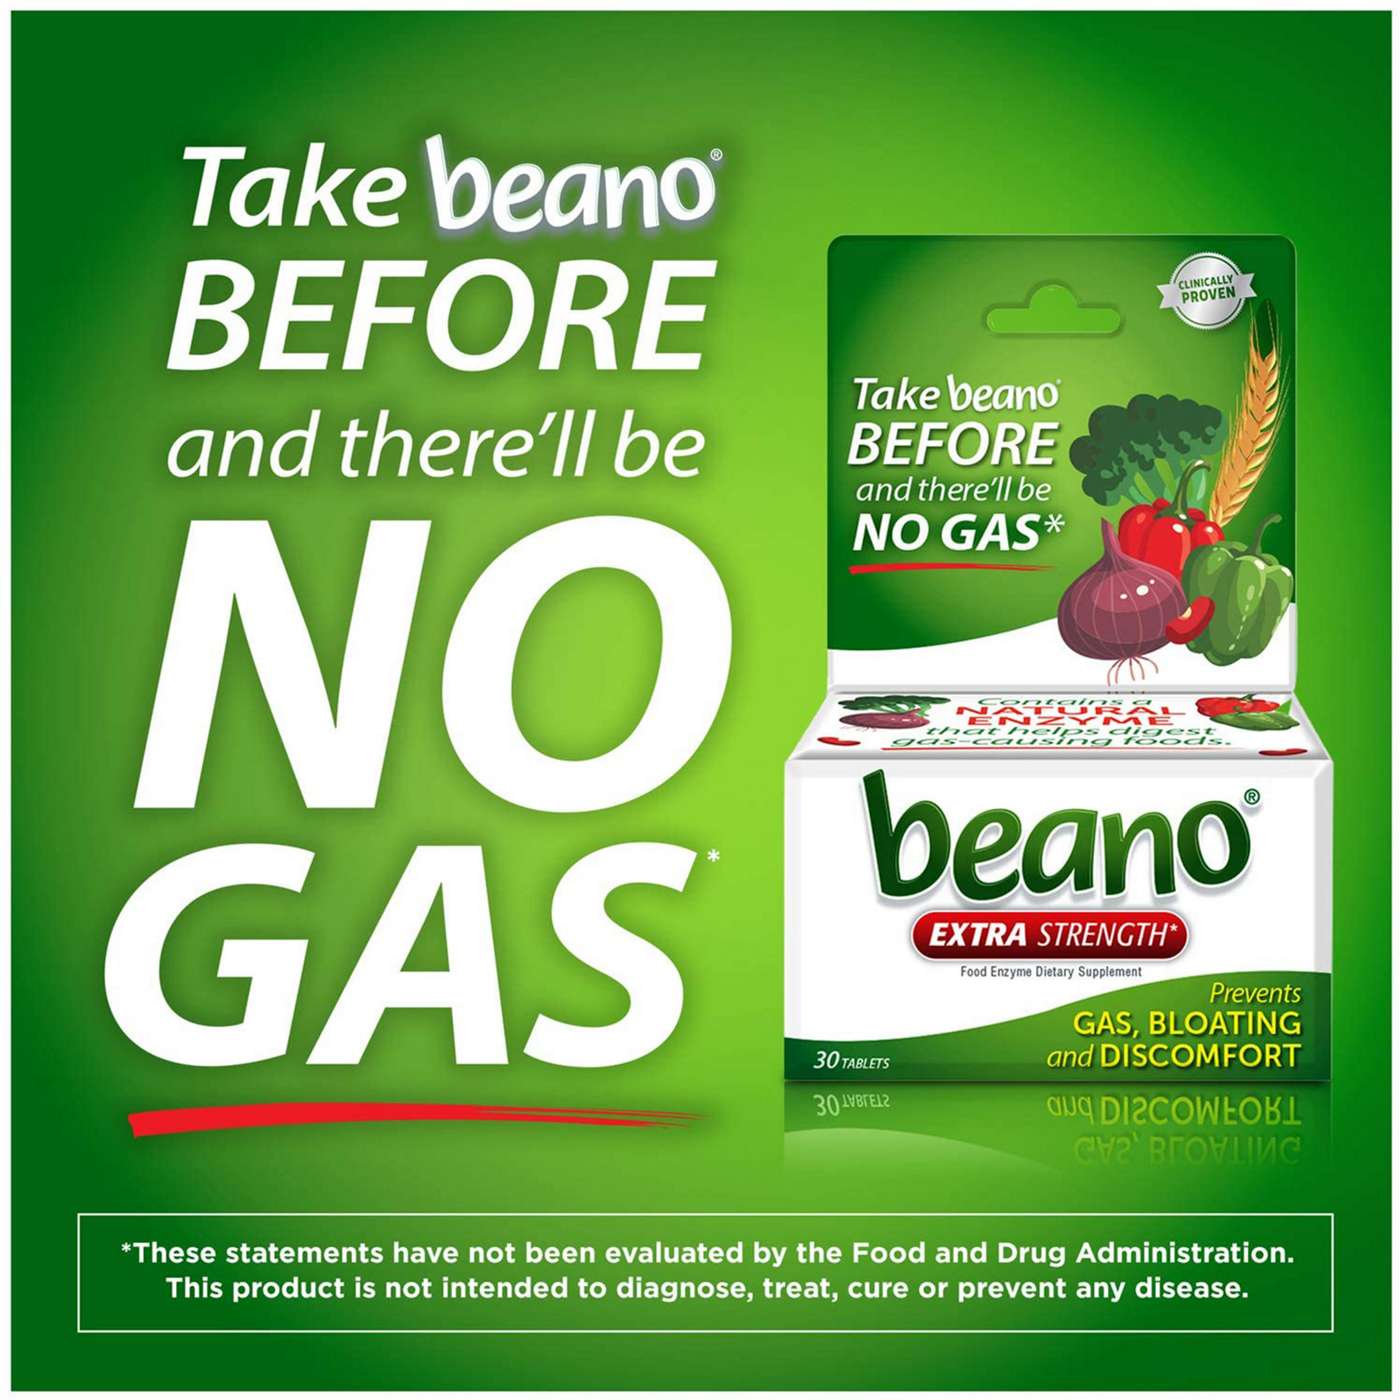 Beano Gas Prevention & Digestive Enzyme Supplement Extra Strength; image 4 of 5